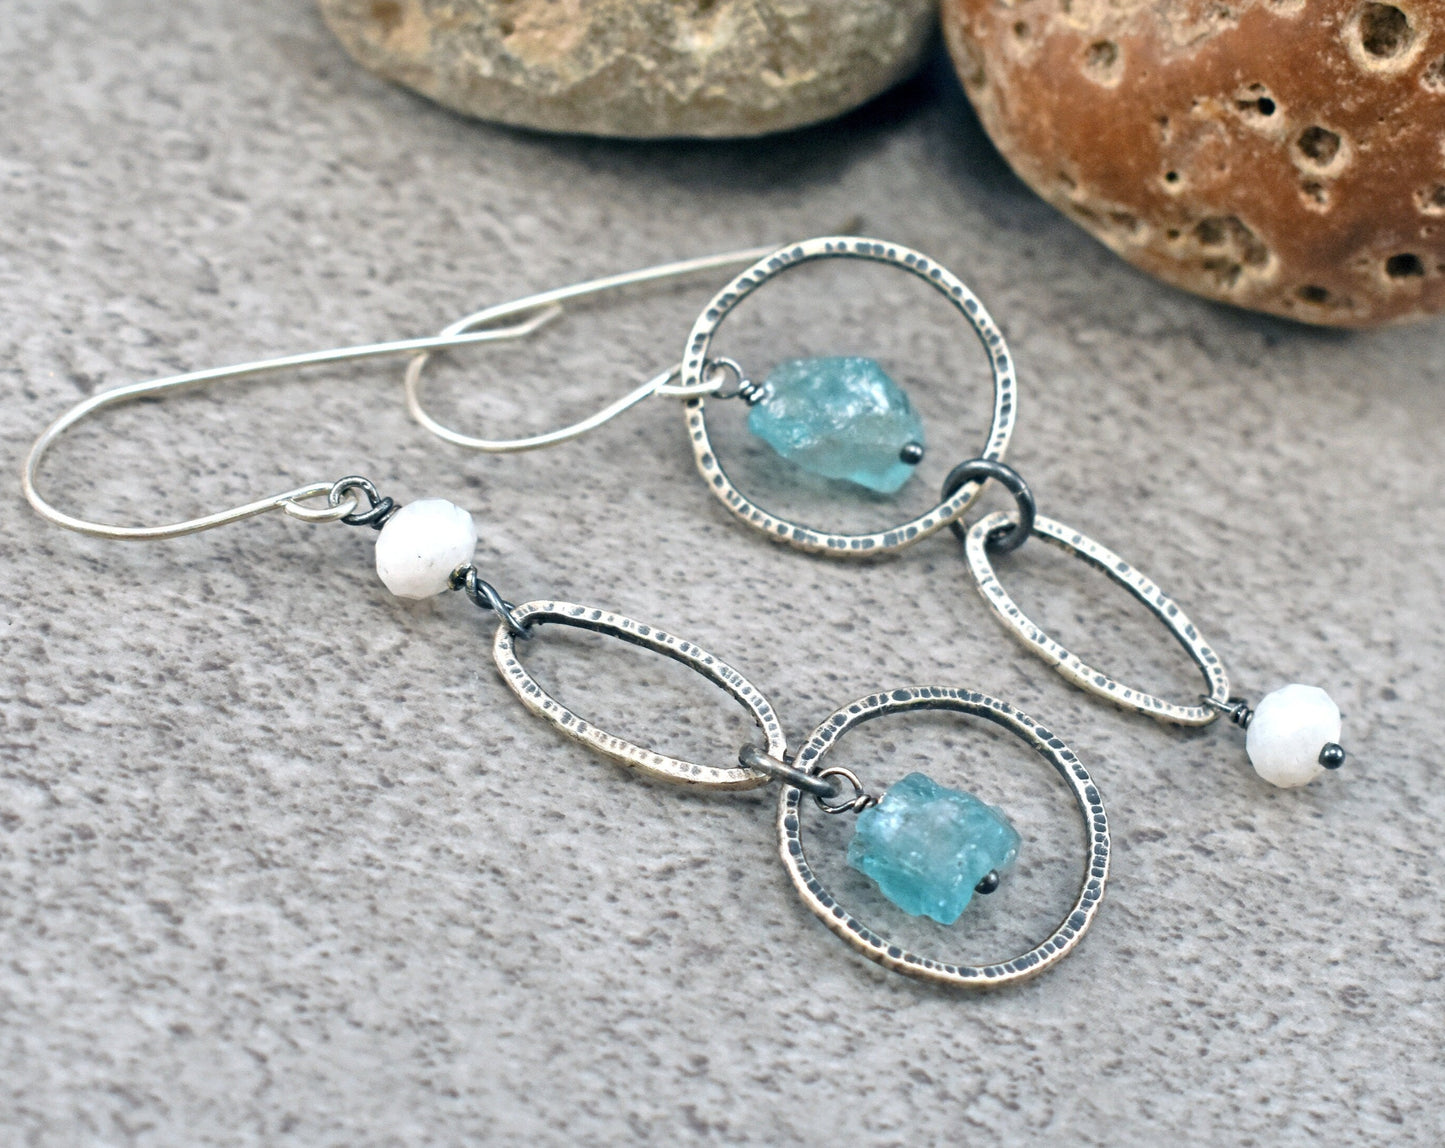 Raw Apatite Asymmetrical Earrings, Rustic Moonstone Sterling Silver Circle Dangles, Natural Rough Blue Stone Jewelry, Artisan Unique